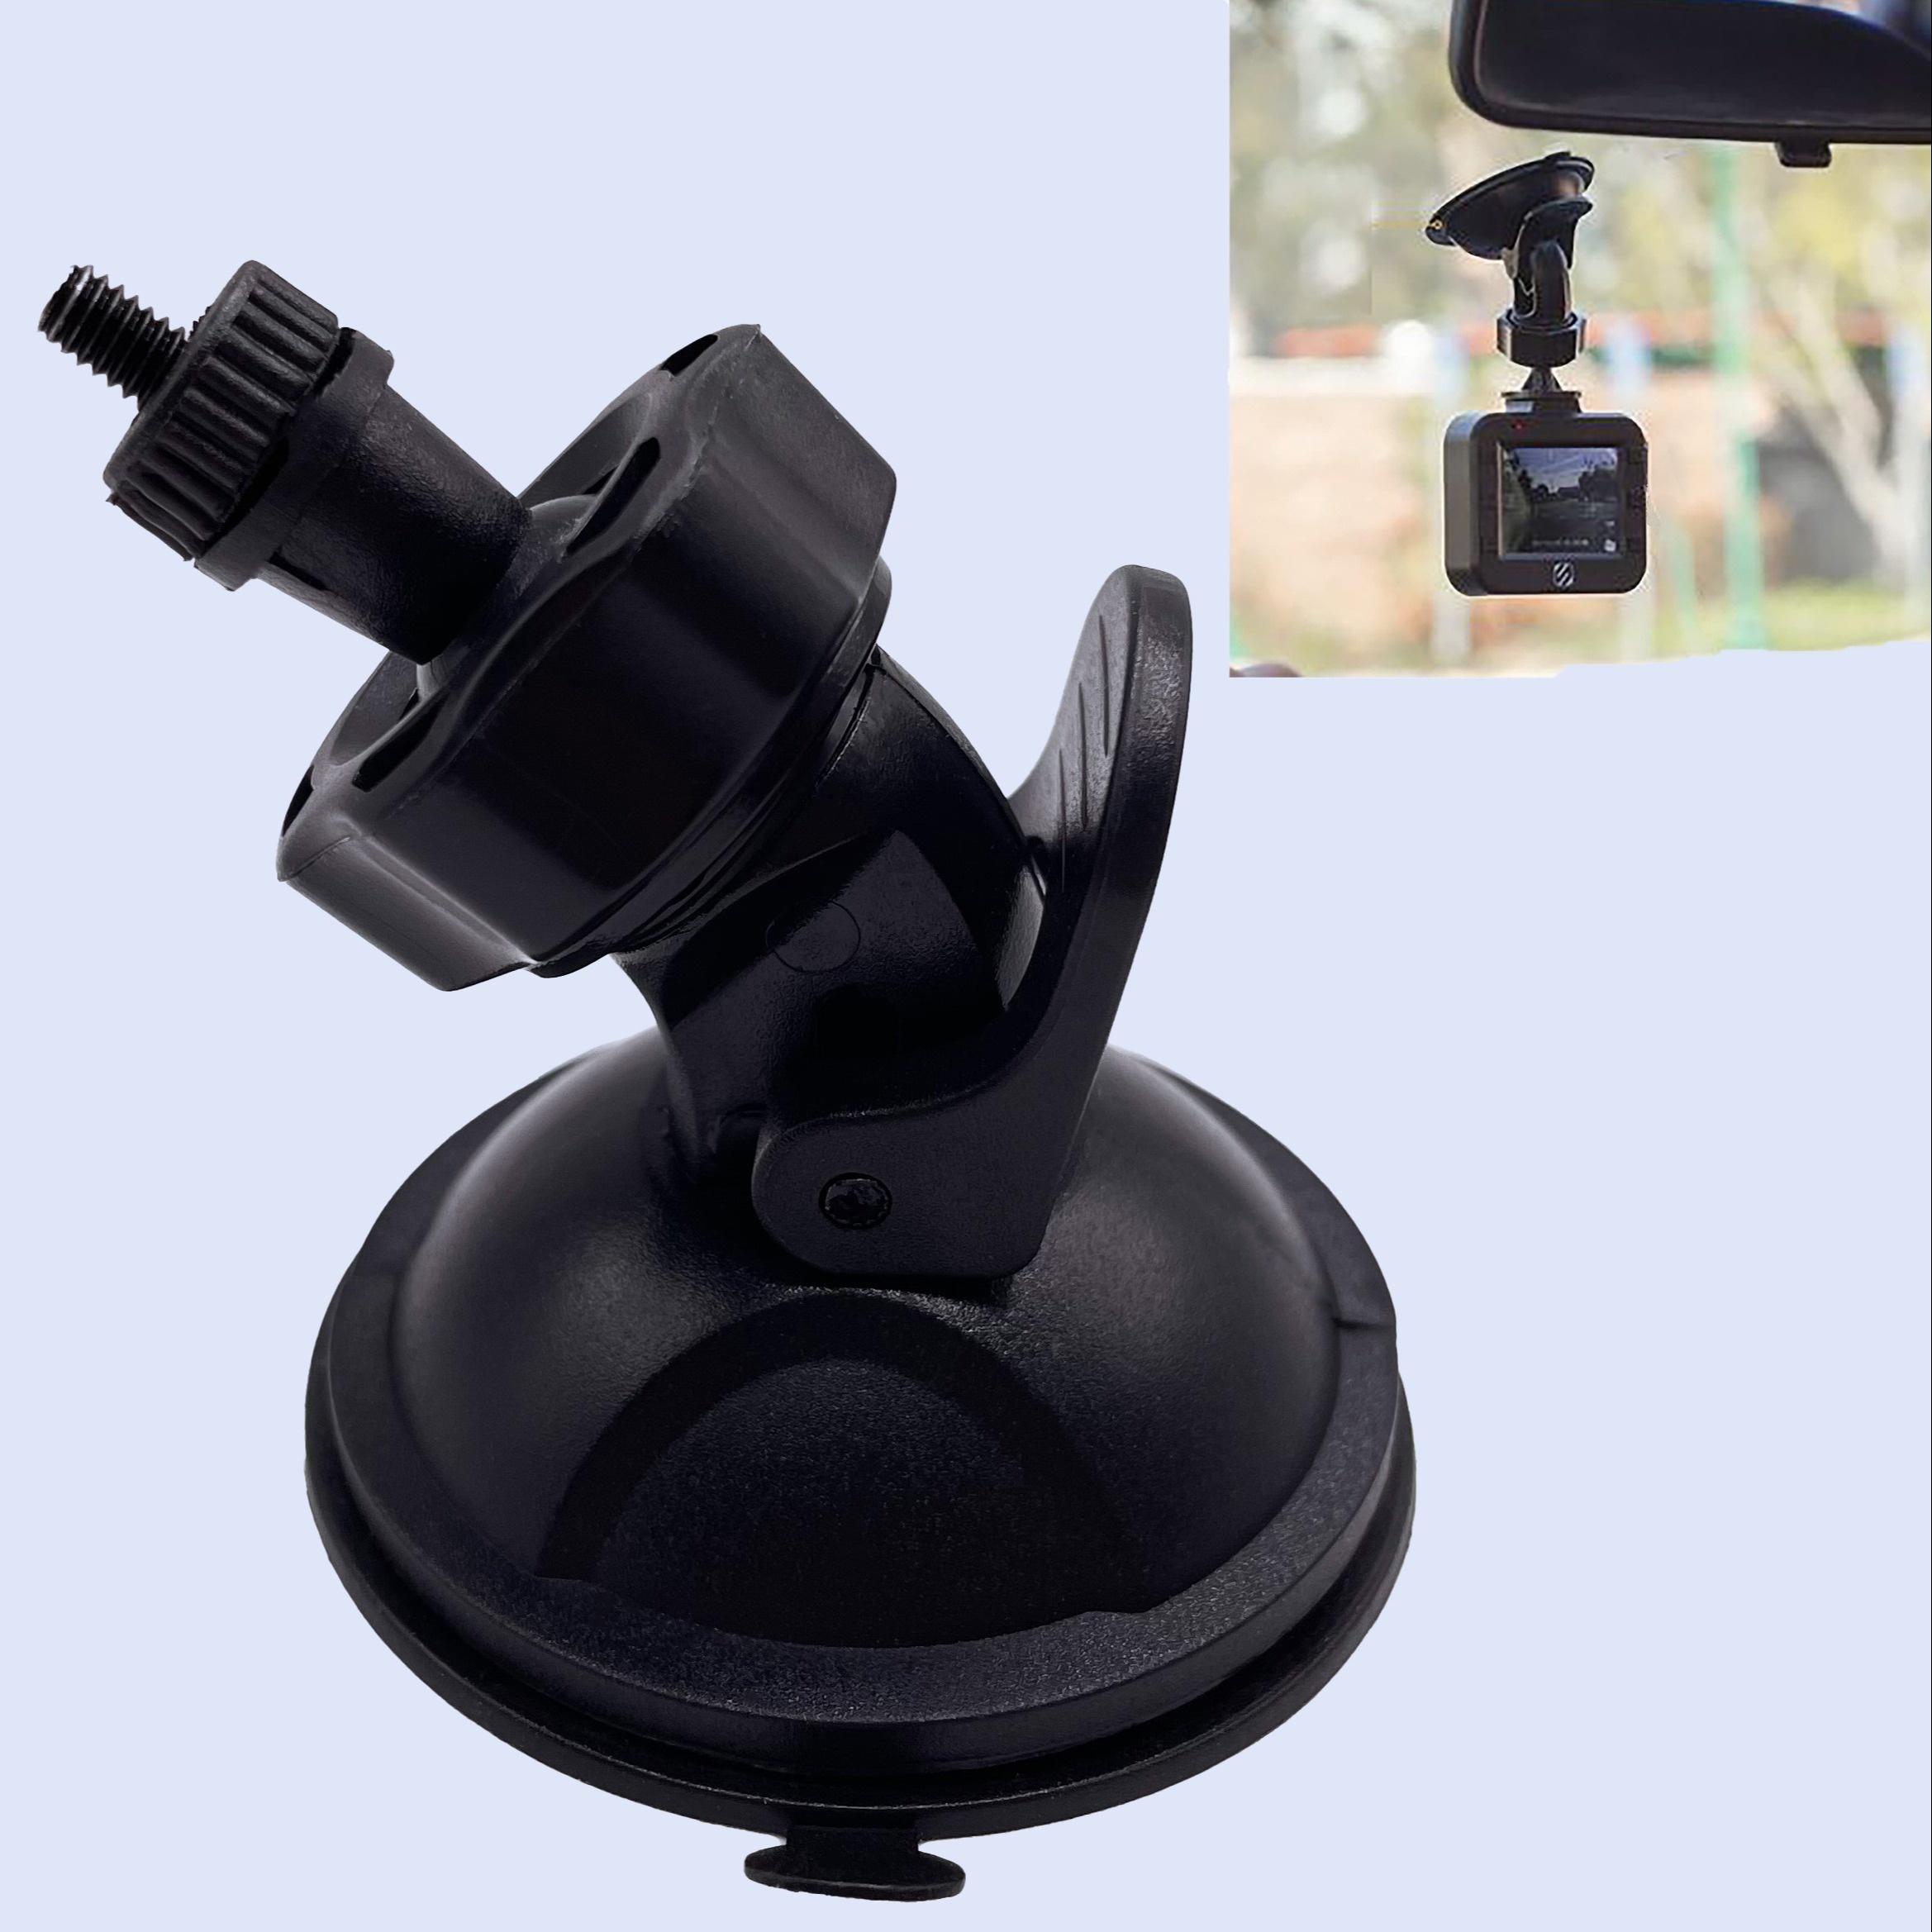 Glucrean Dash Cam Mount Compatible with 70mai Smart Dash Cam 1S / 70mai  Dash Cam M300, Suction Cup Mount Easy to Install and Use, Strong Suction  Power